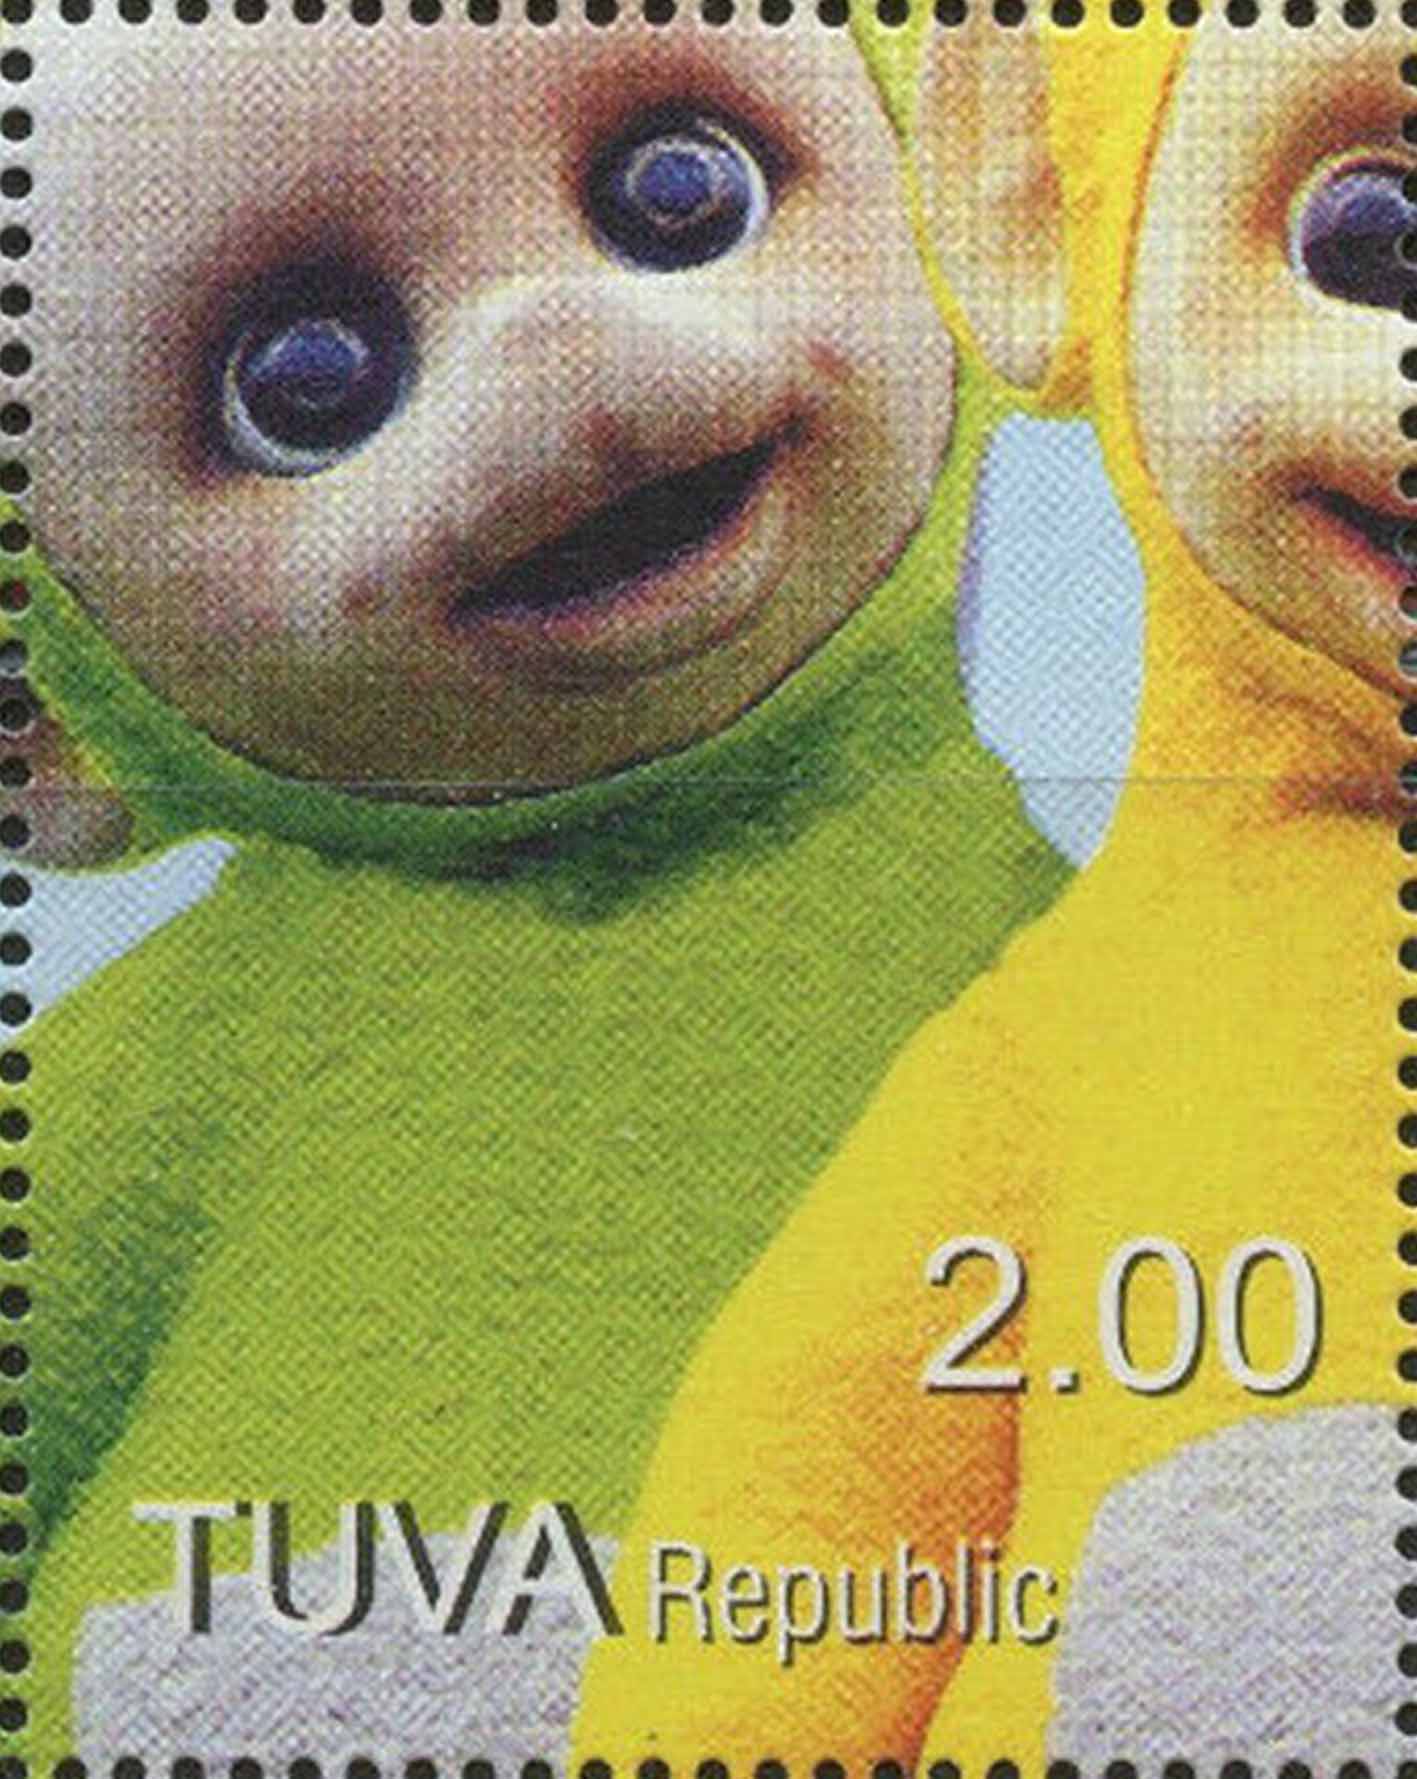 Teletubbies, an issue that saw English dealer Clive Feigenbaum 
convicted and fined in April 2001.

Click this stamp to see the full set.